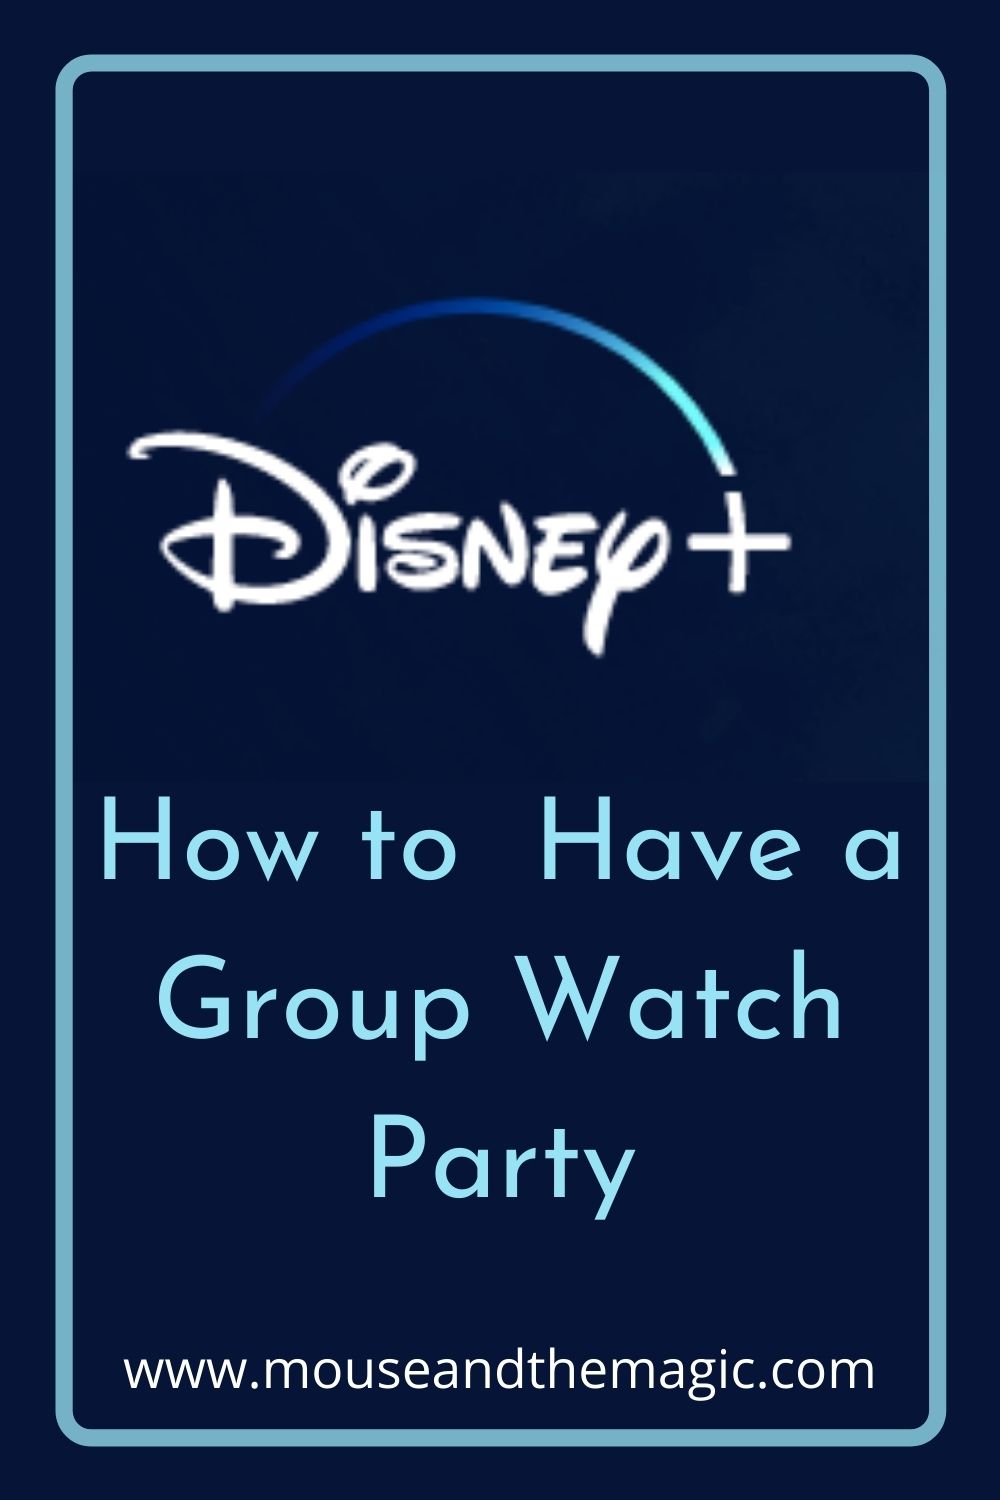 How to Host a Disney + Watch Party - a Step by Step Guide to Group Watch on Disney Plus